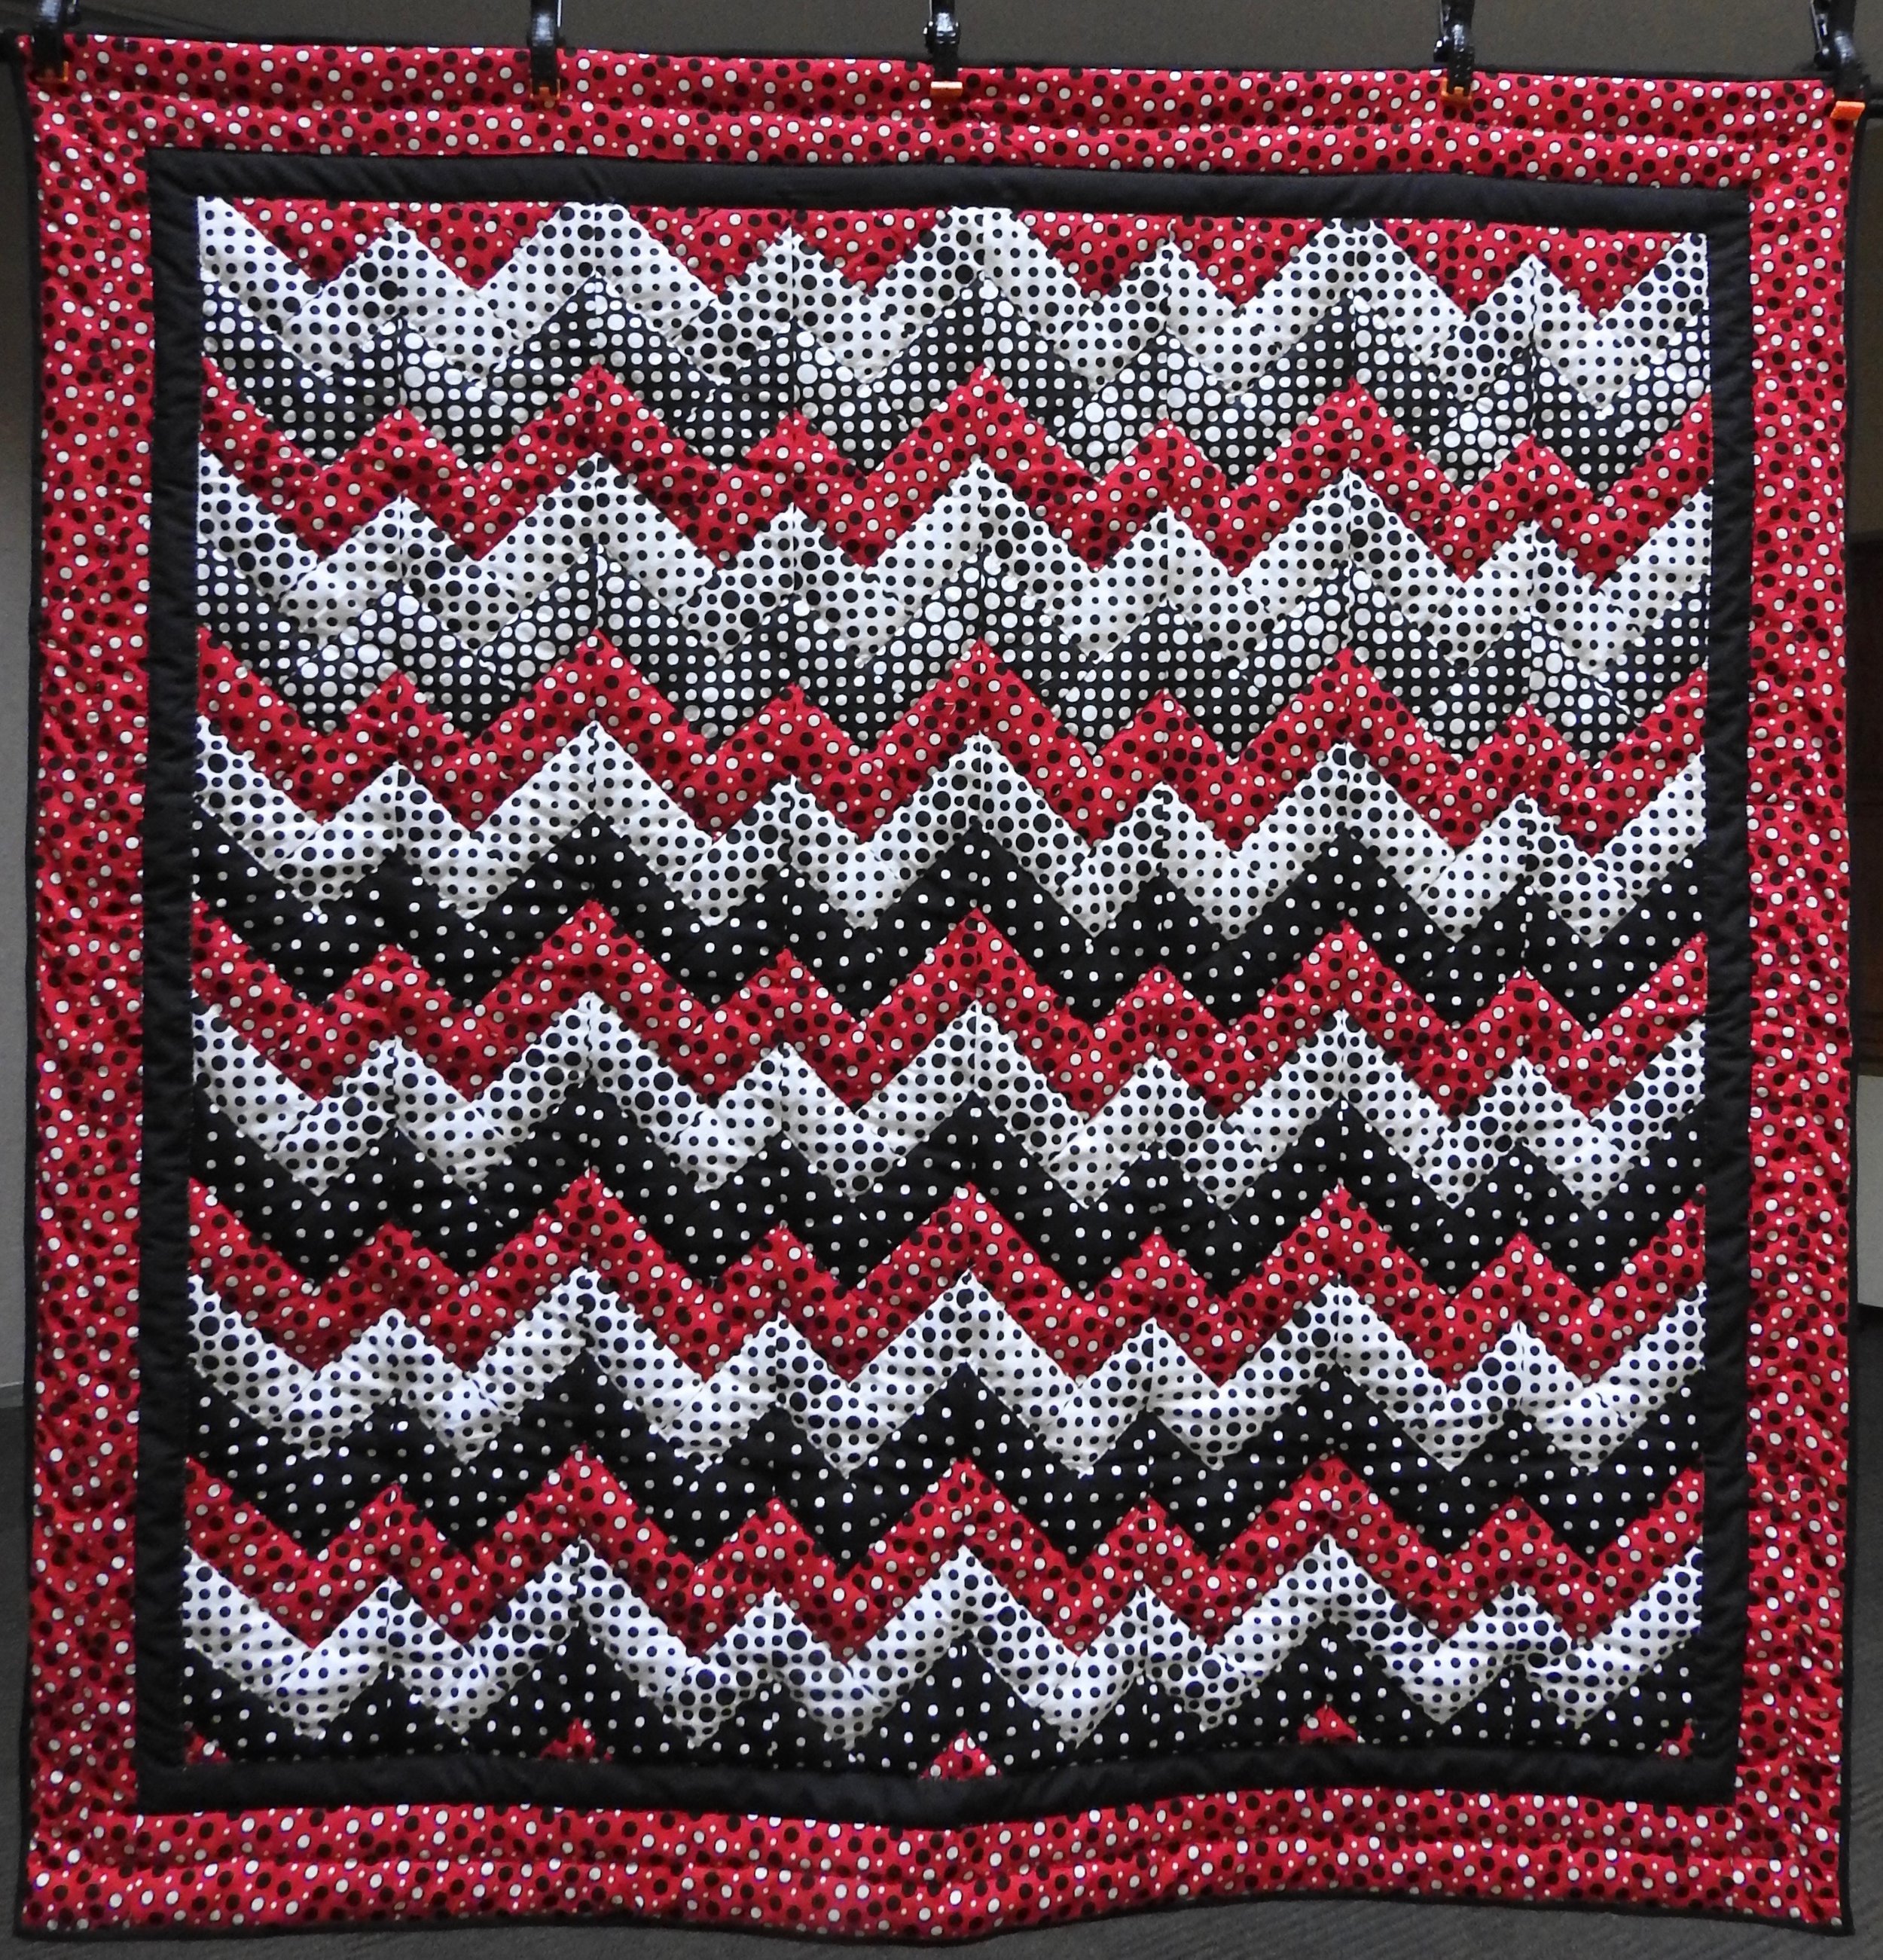  A Zig and a Zag, Pieced, Hand Quilted by Evergreen Place Quilters, donated Anonymously, 54 x 56”